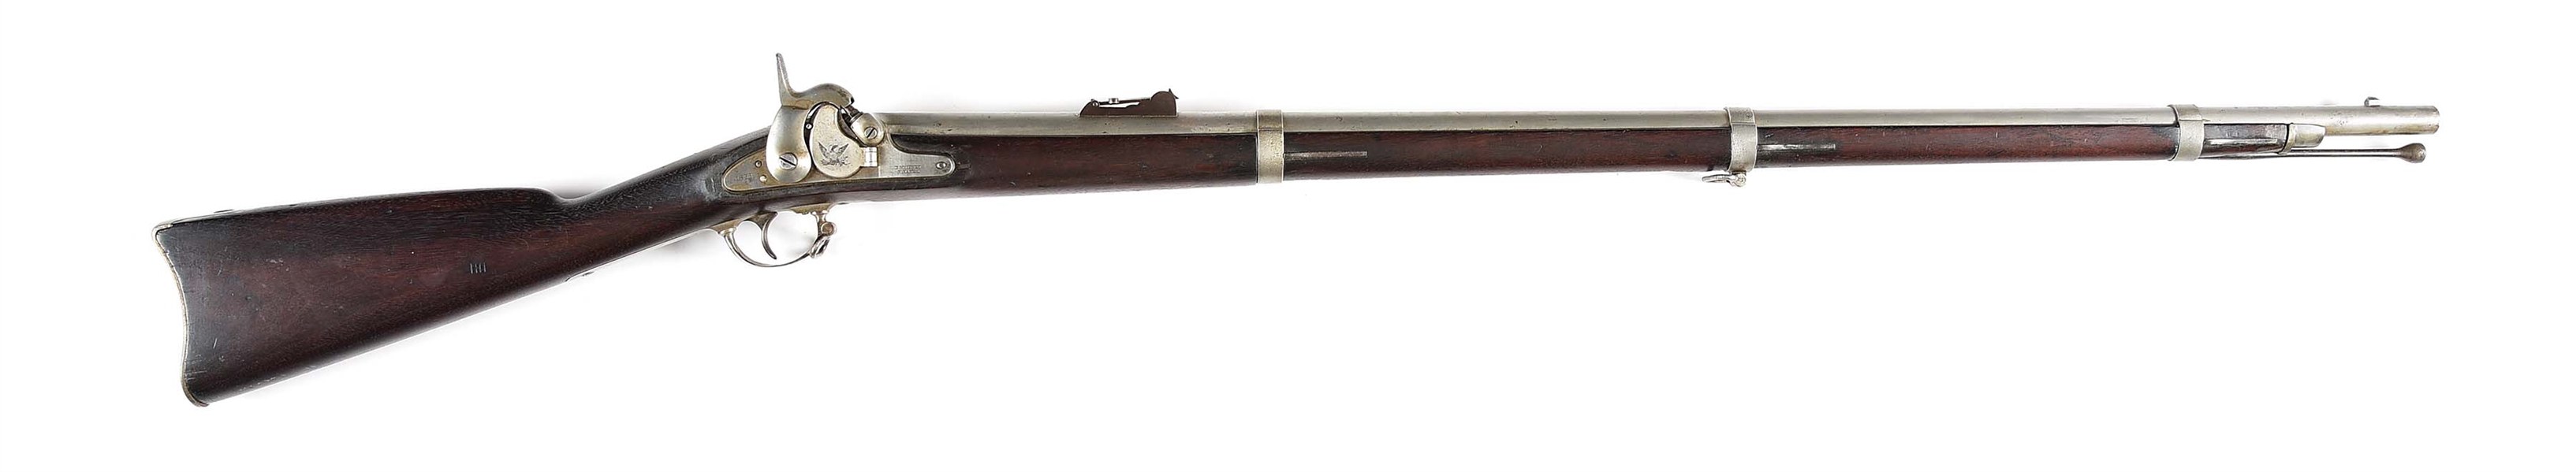 (A) RARE WHITNEY MODEL 1855 .58 CALIBER PERCUSSION RIFLED MUSKET DATED 1858.